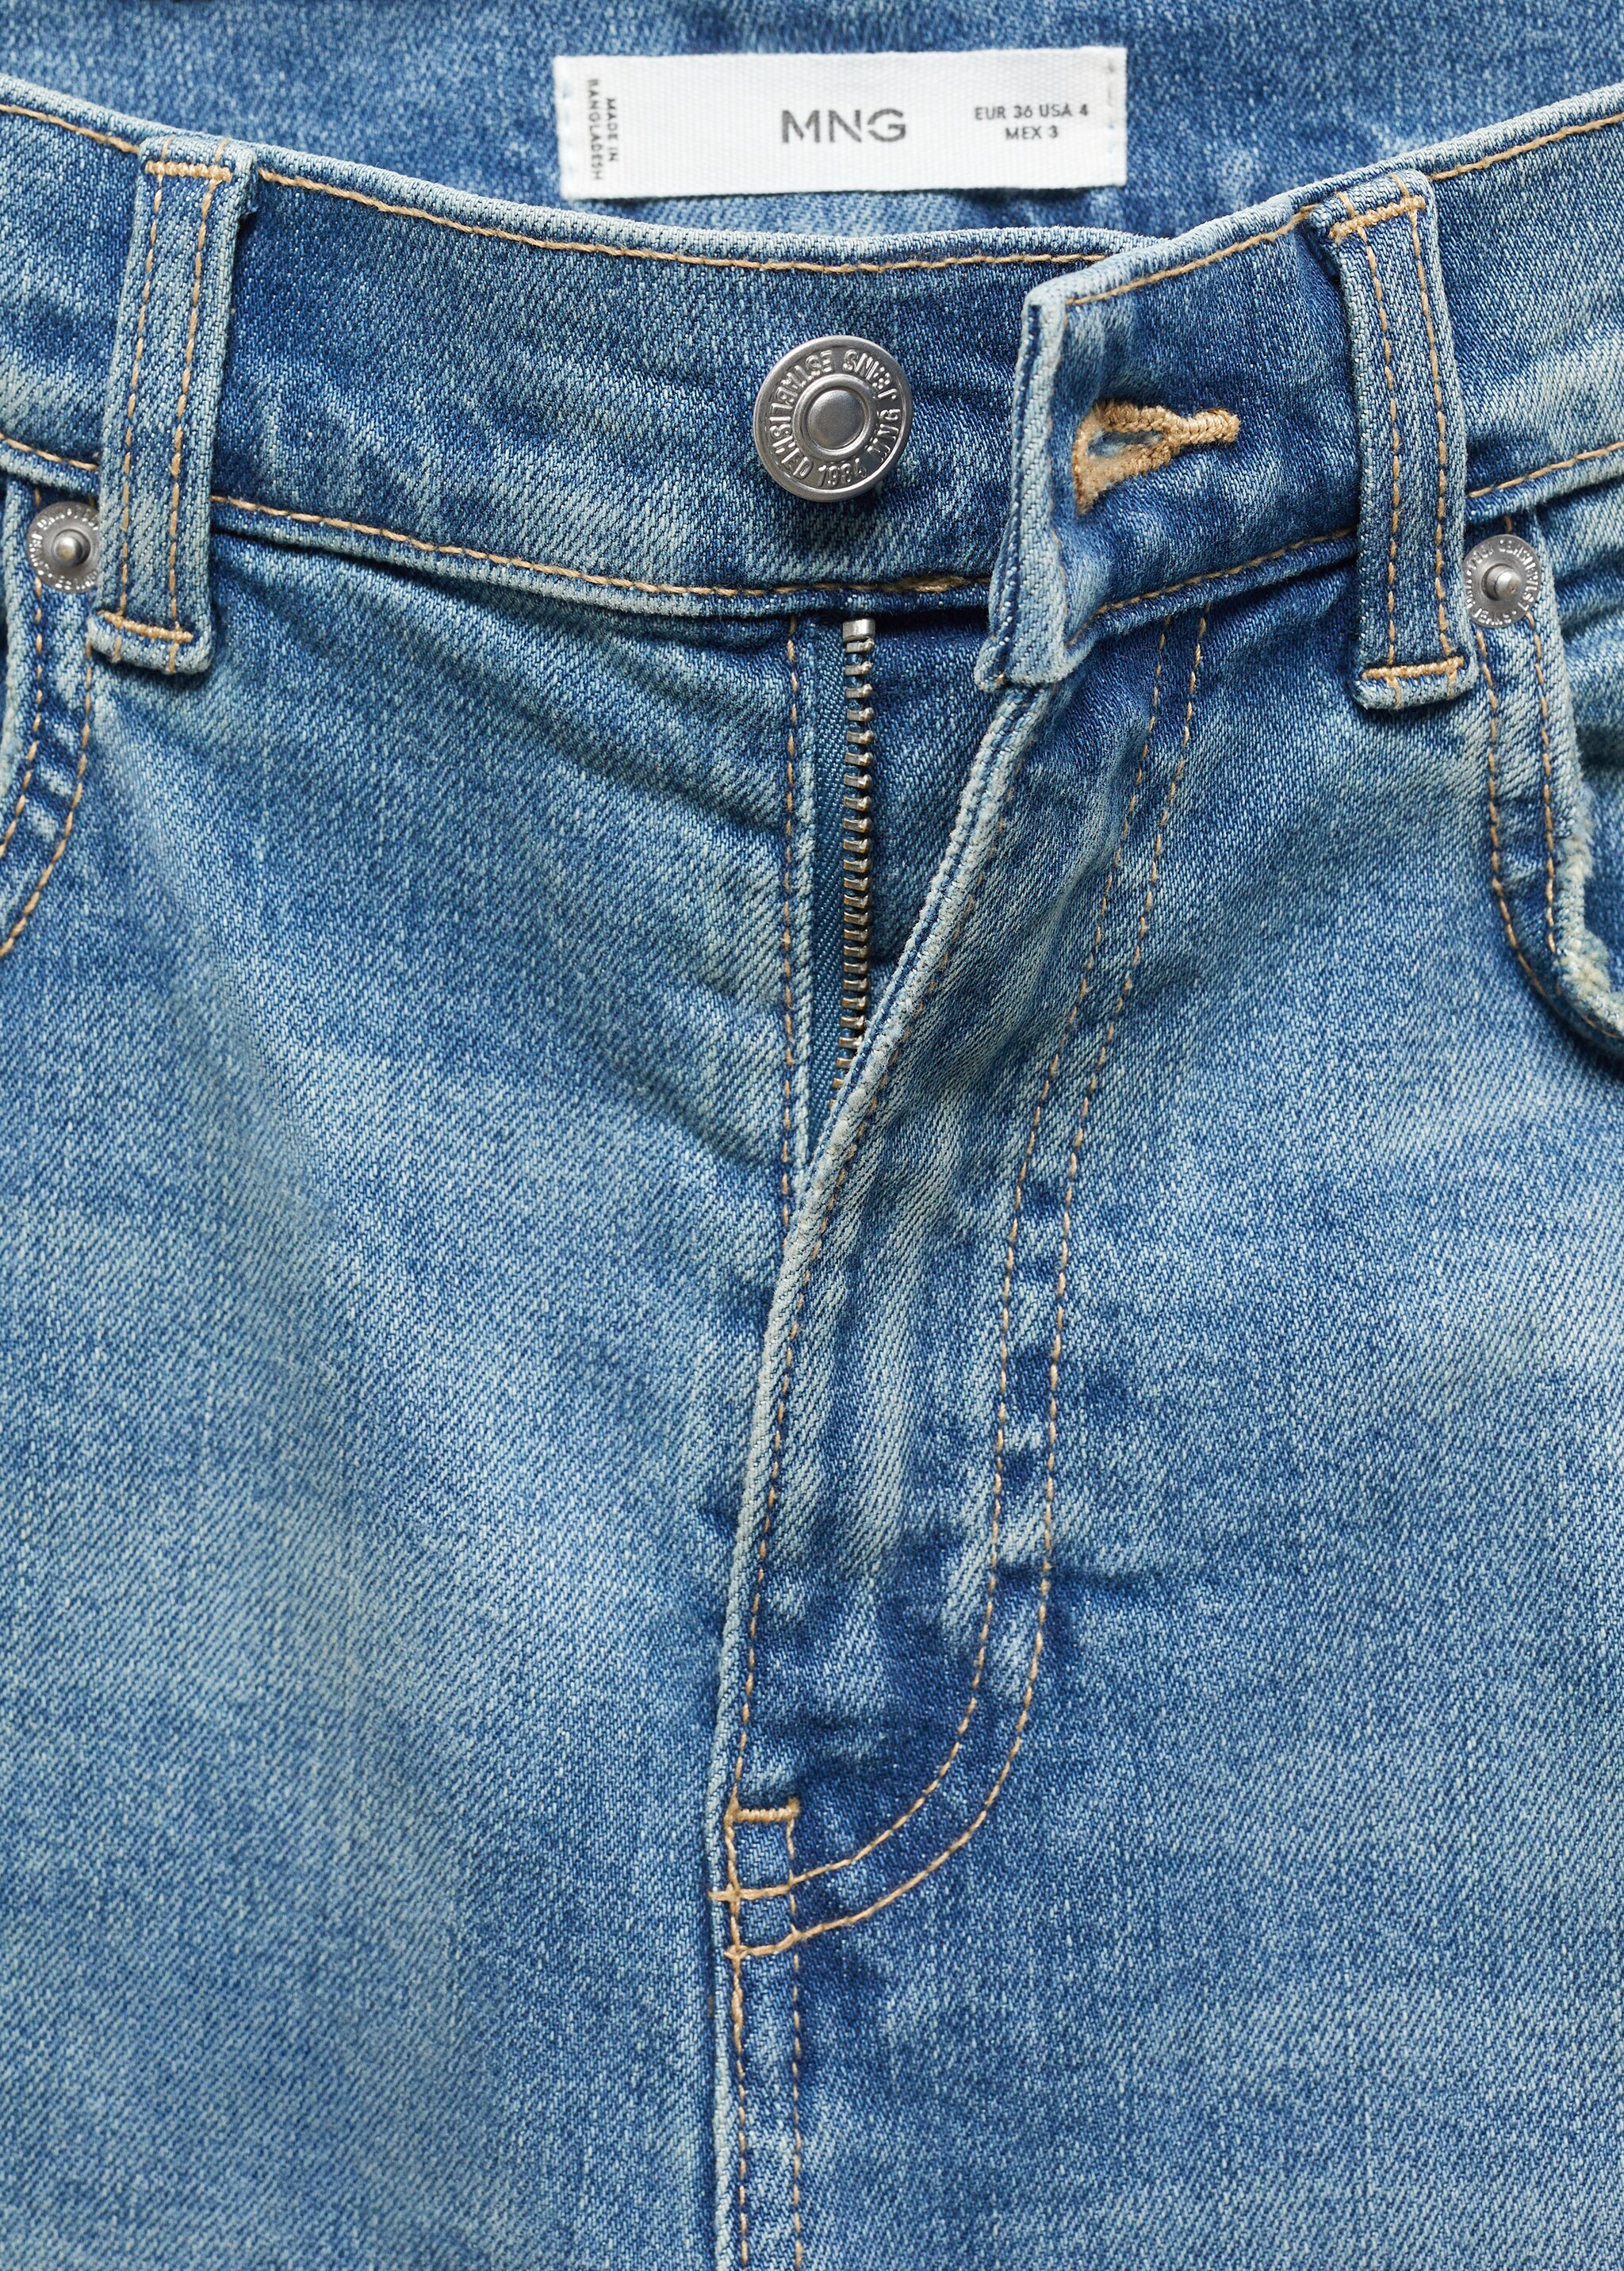 High-waist flared jeans - Details of the article 8